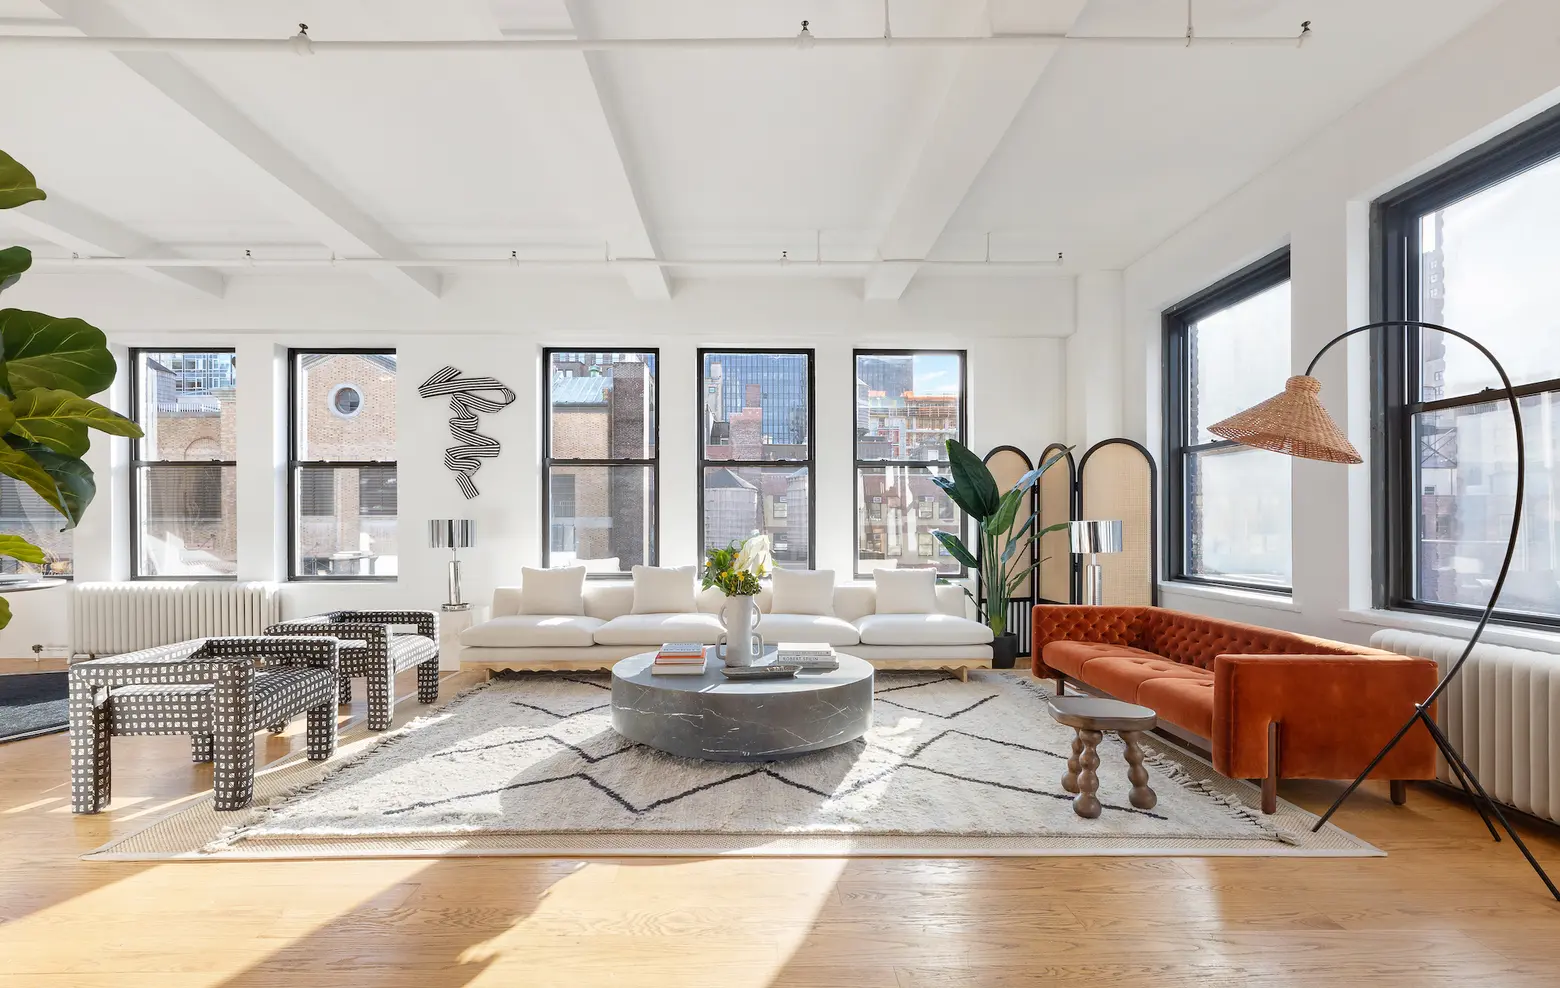 For $3M, this light-filled Midtown duplex loft is surrounded by Manhattan skyline views